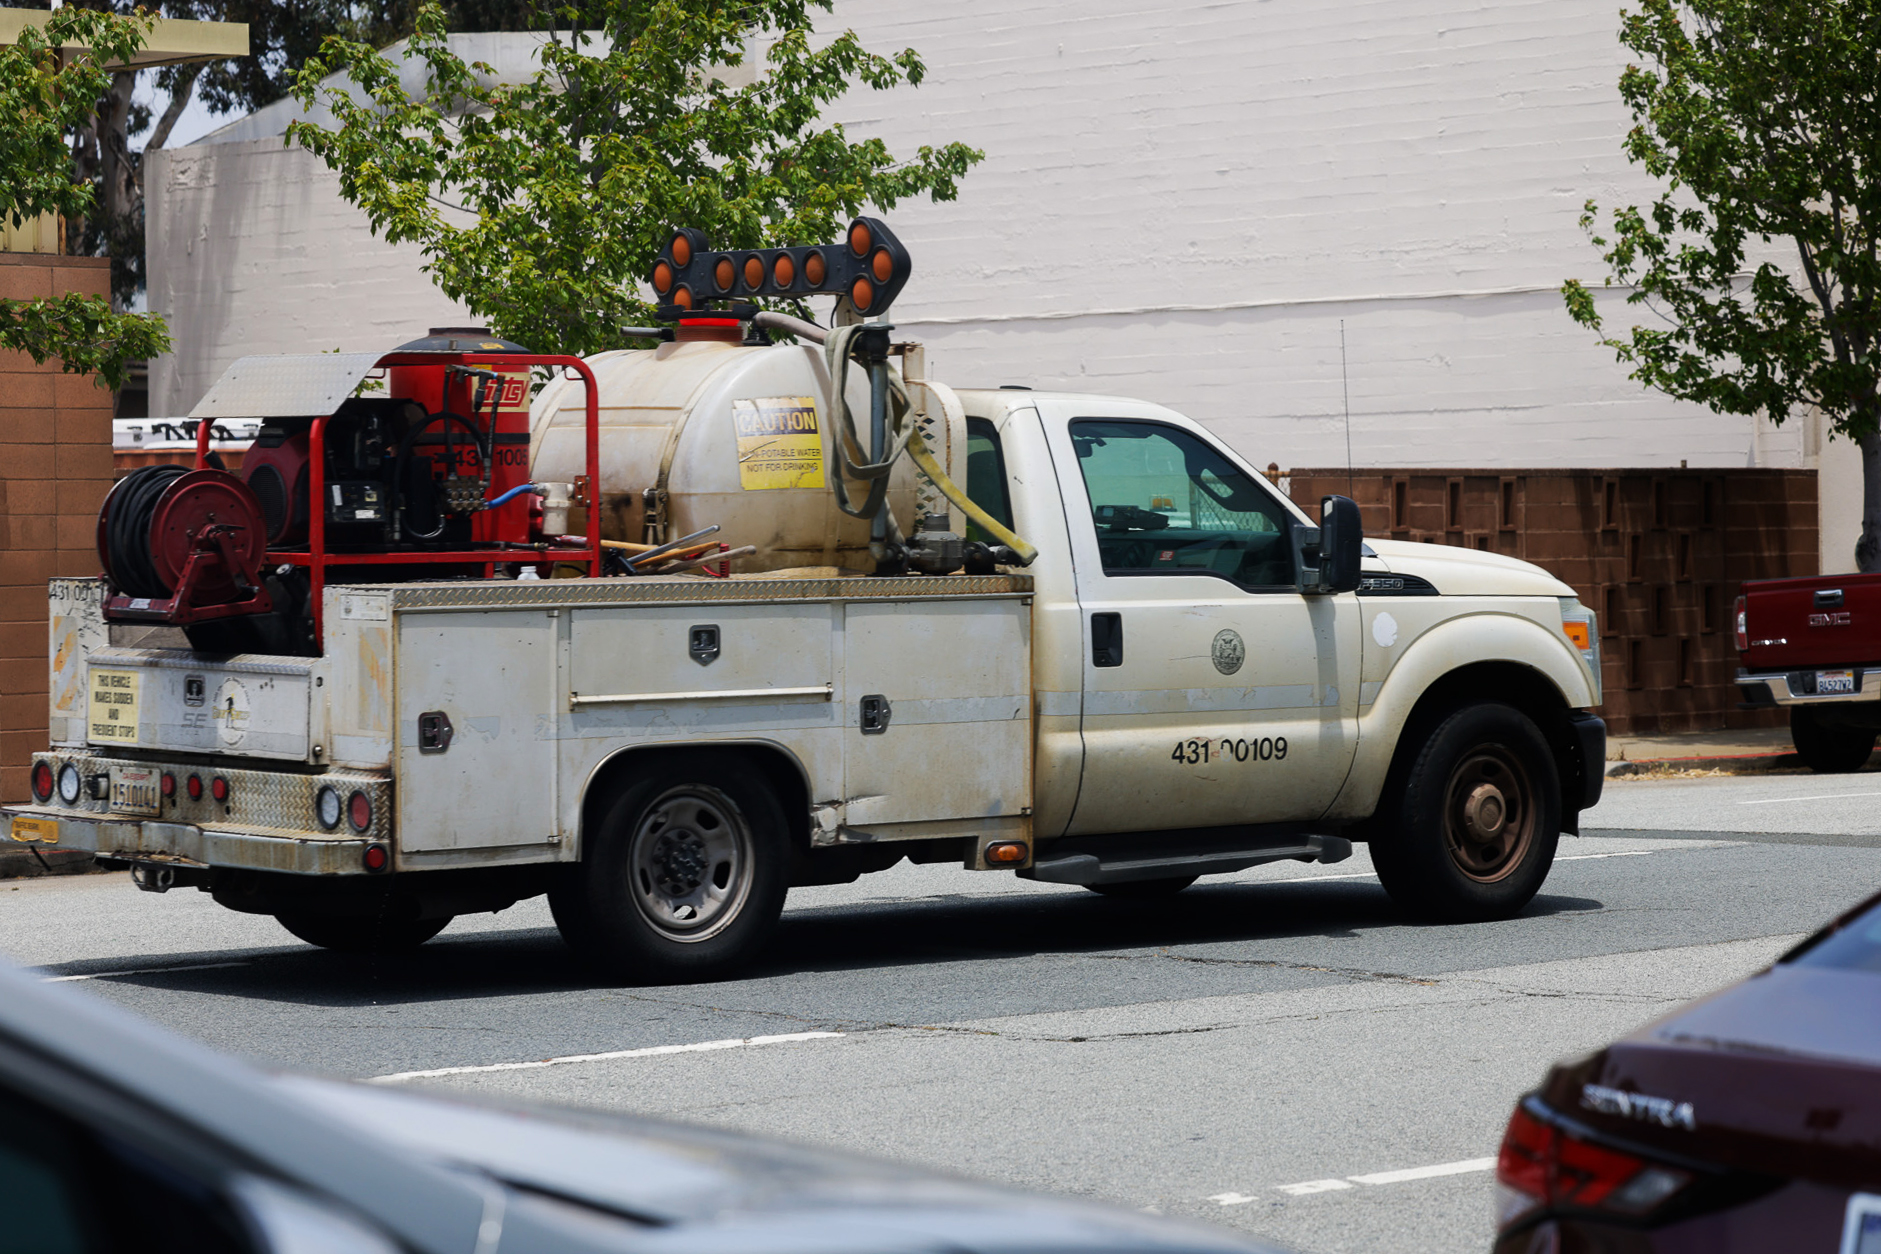 A utility pickup truck with equipment, including a large tank and hoses, driving on a city street.